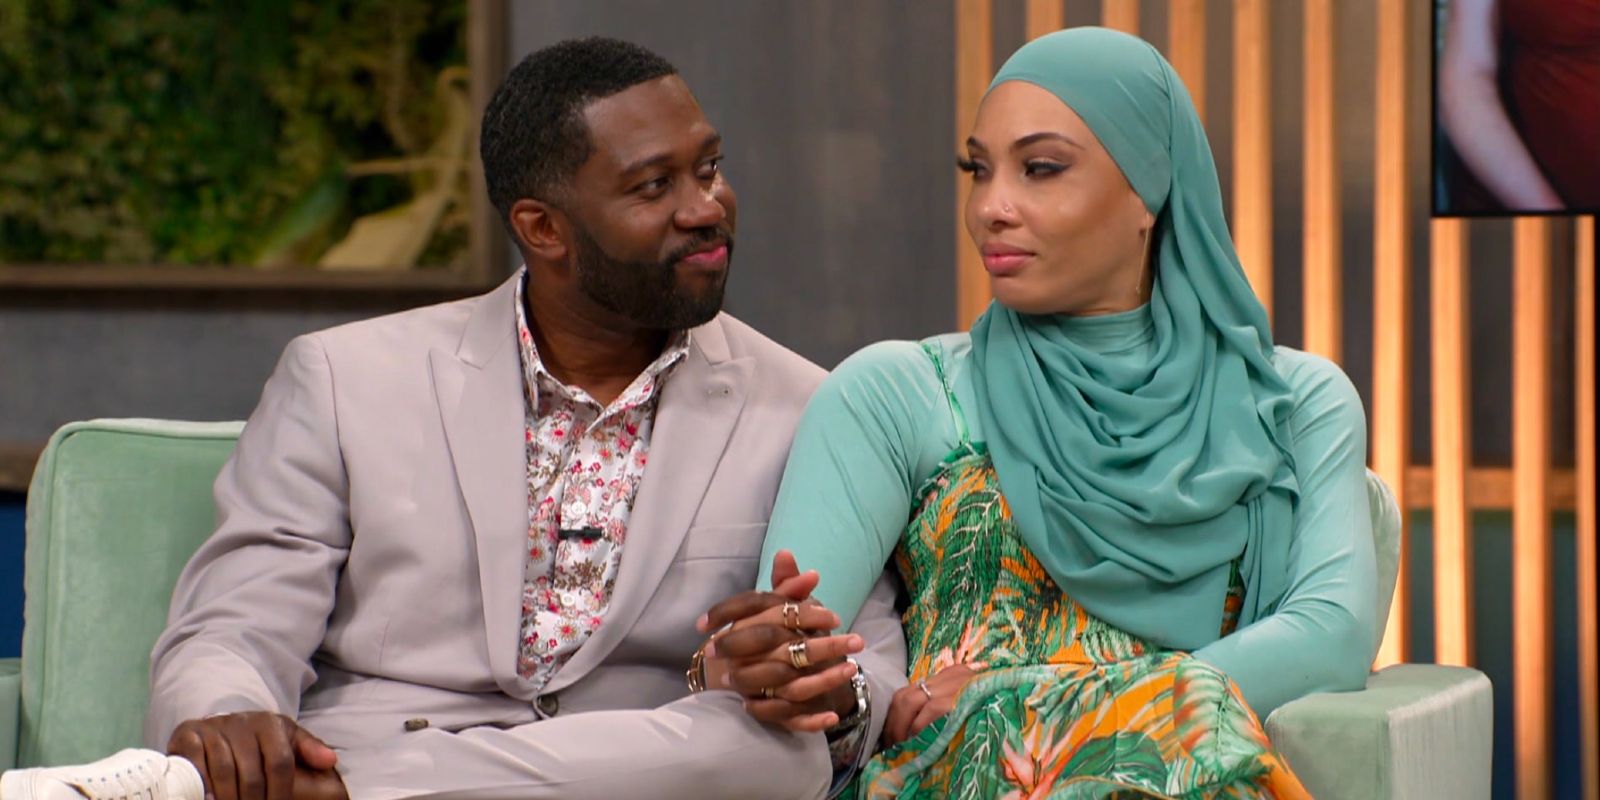 Bilal Hazziez and Shaeeda Sween at the 90 Day Fiancé: Happily Ever After season 7 Tell All